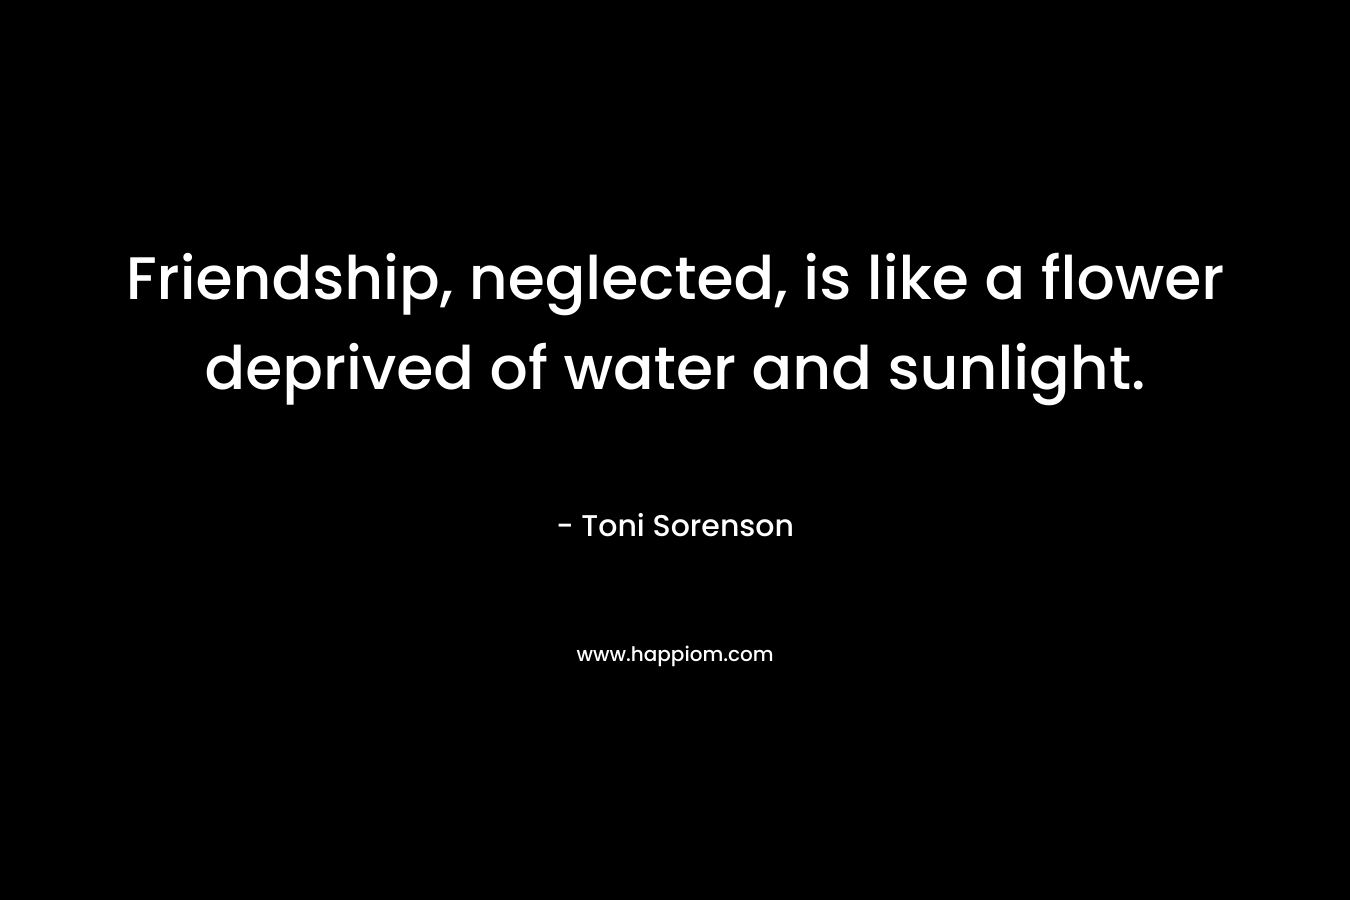 Friendship, neglected, is like a flower deprived of water and sunlight. – Toni Sorenson